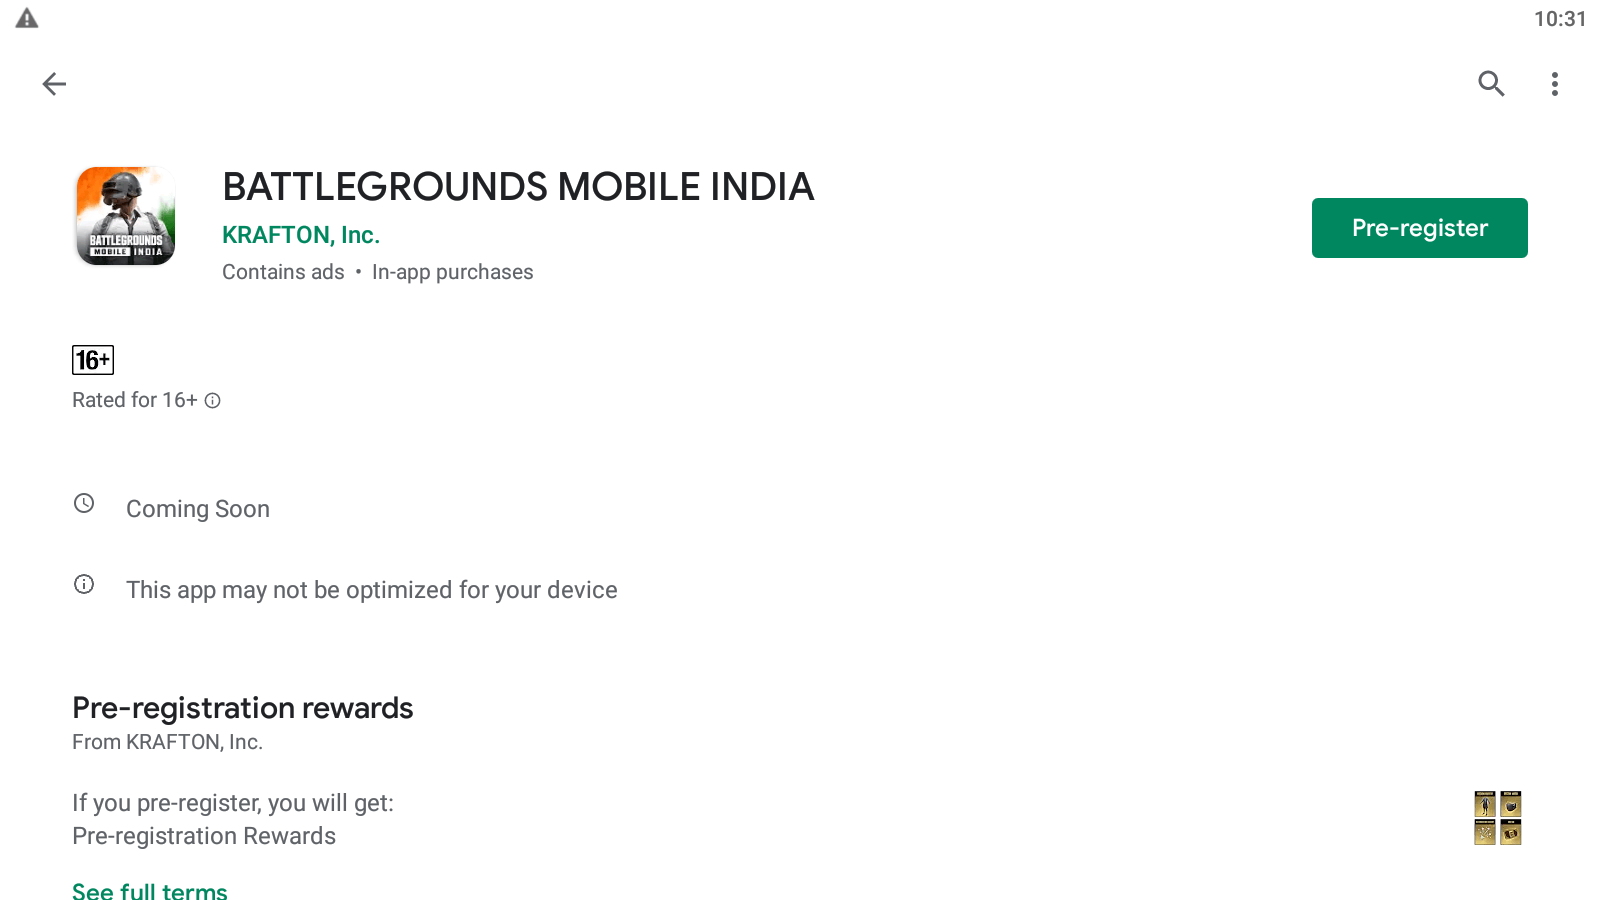 BATTLEGROUNDS MOBILE INDIA Beta Is Now Live And Open For Registration